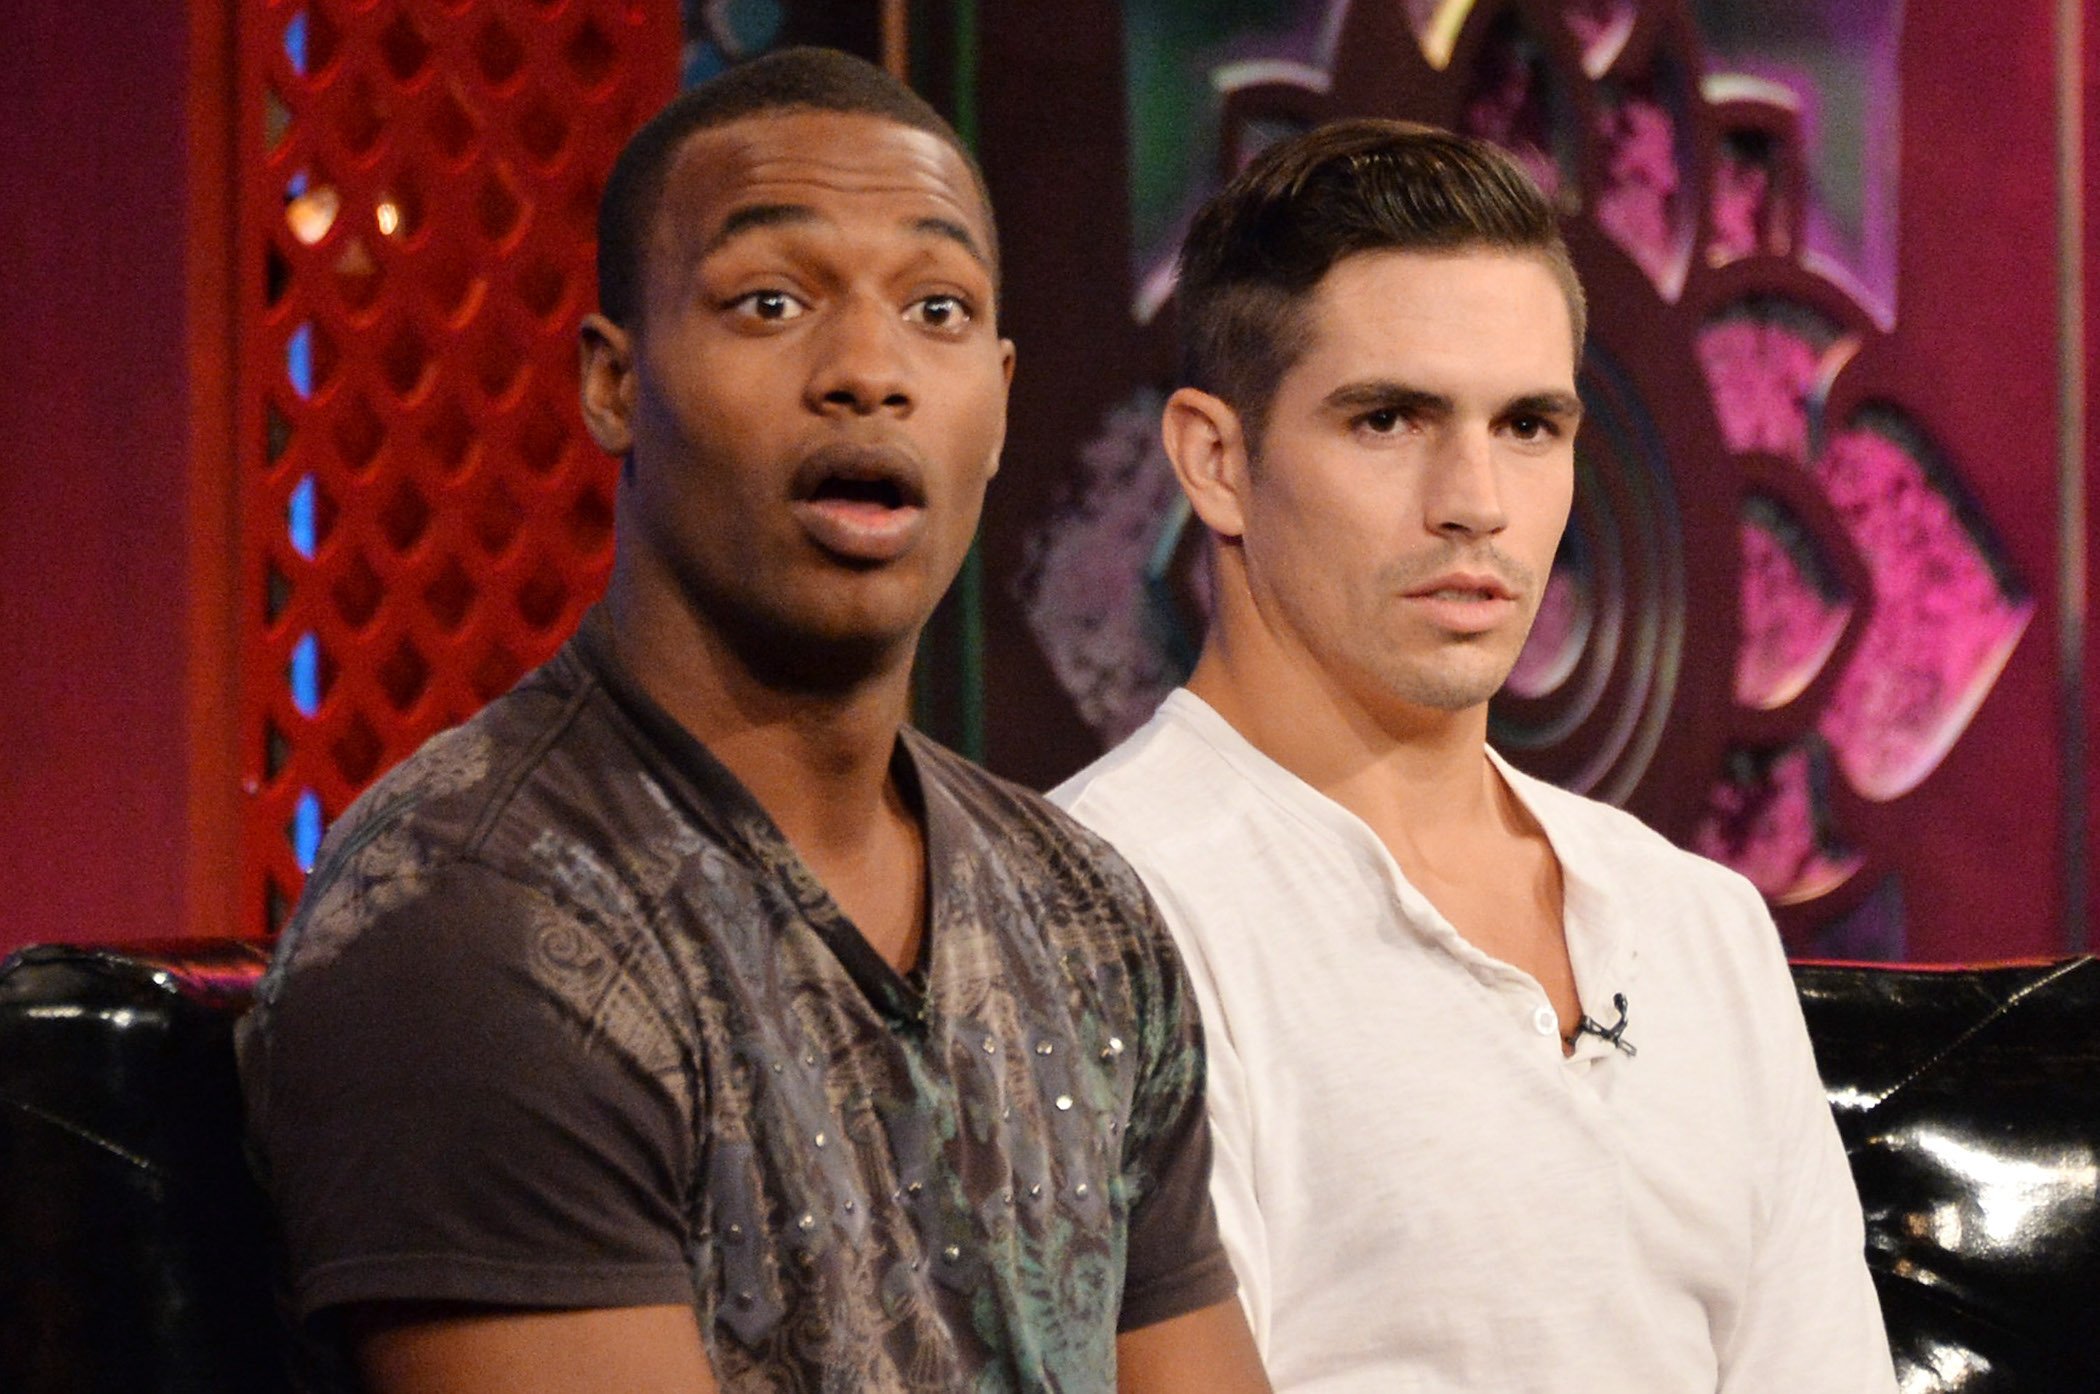 Marlon Williams looking surprised and Jordan Wiseley sitting next to him at MTV's 'The Challenge: Rivals II' final episode and reunion party